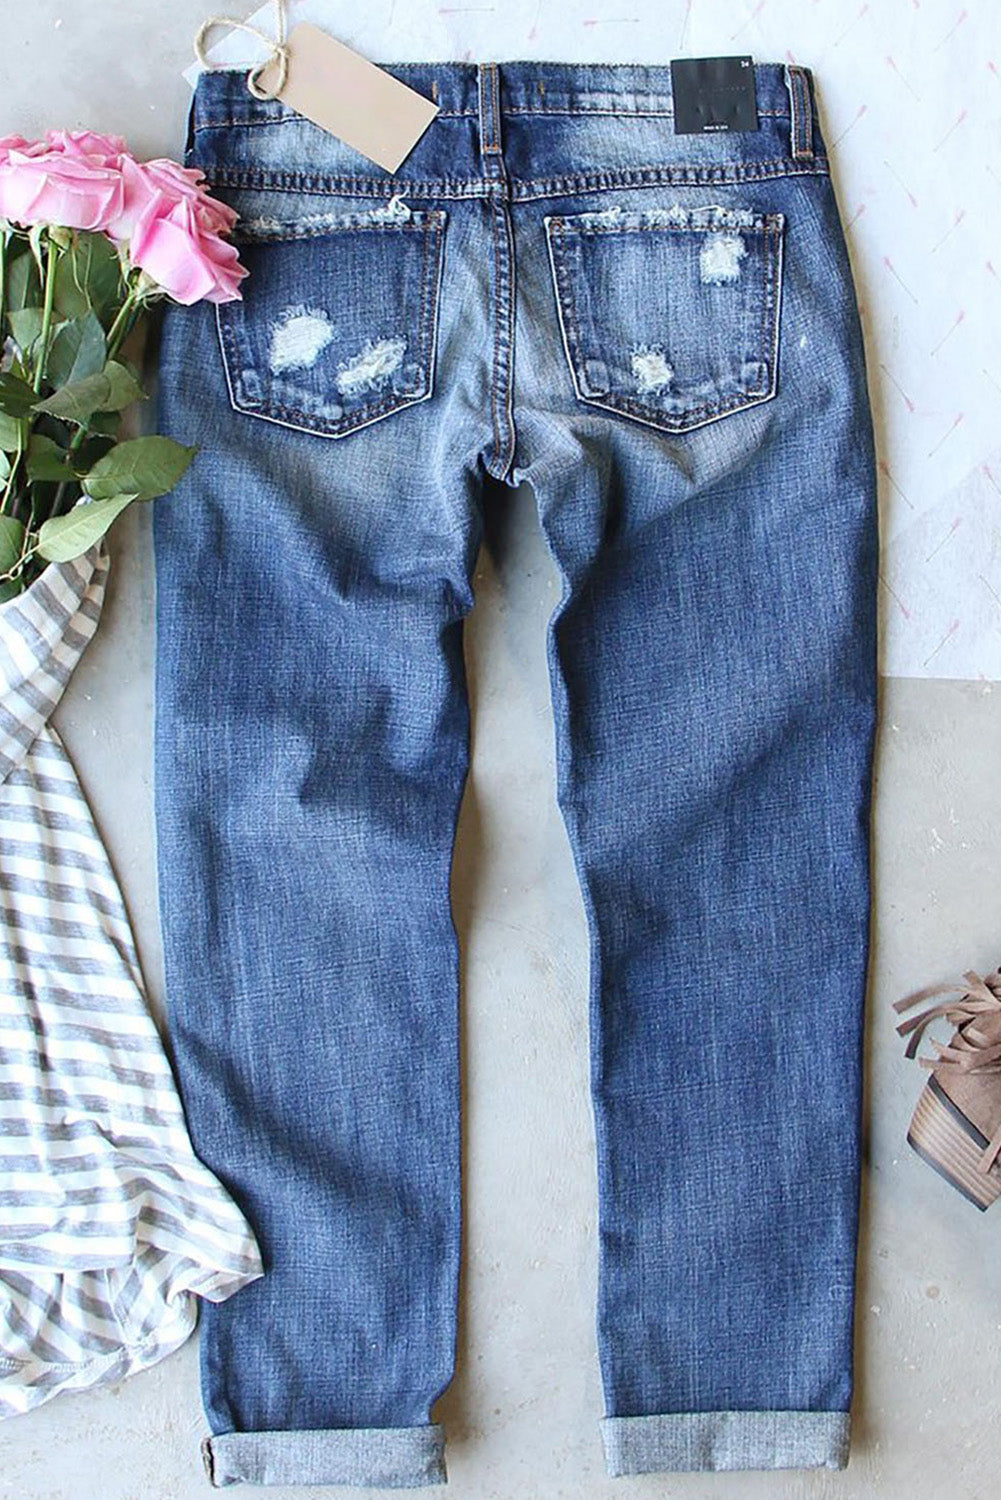 a pair of jeans with a flower and a tag